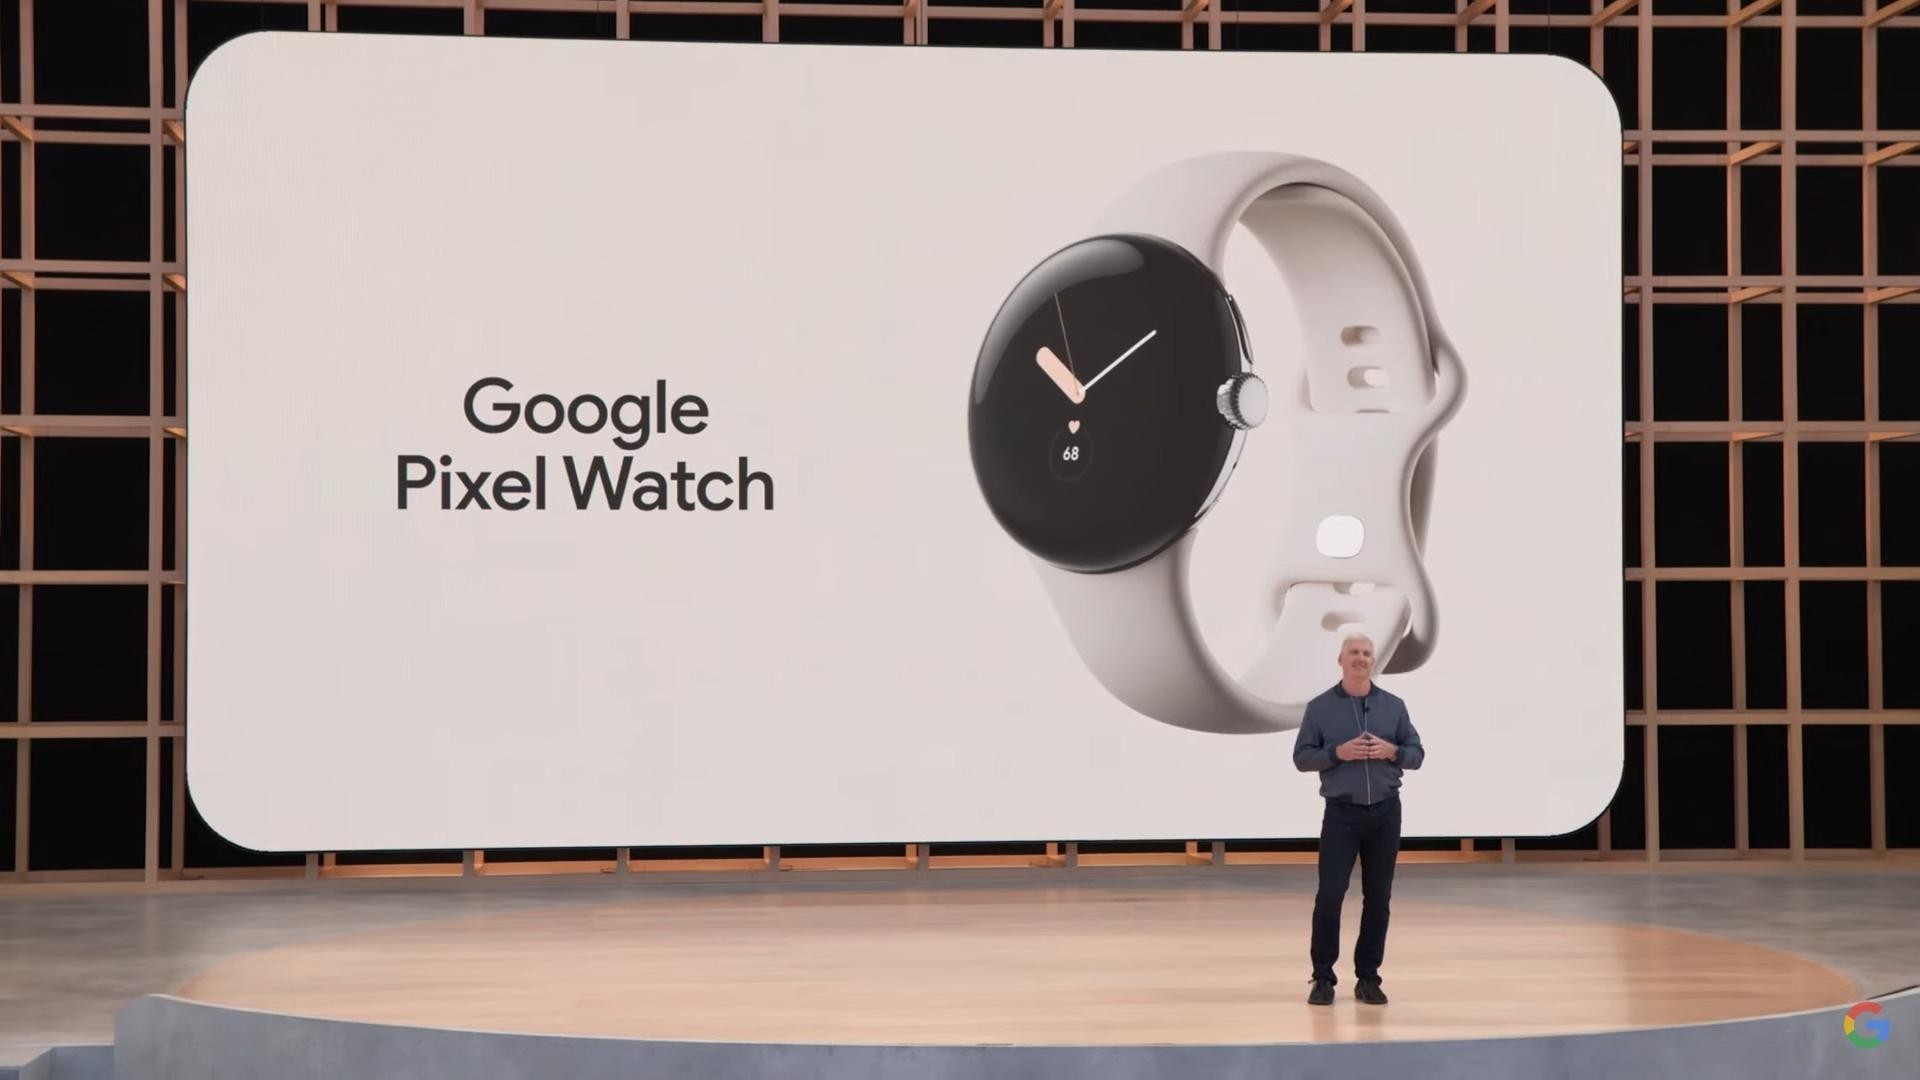 Google Pixel Watch: here’s everything we know so far